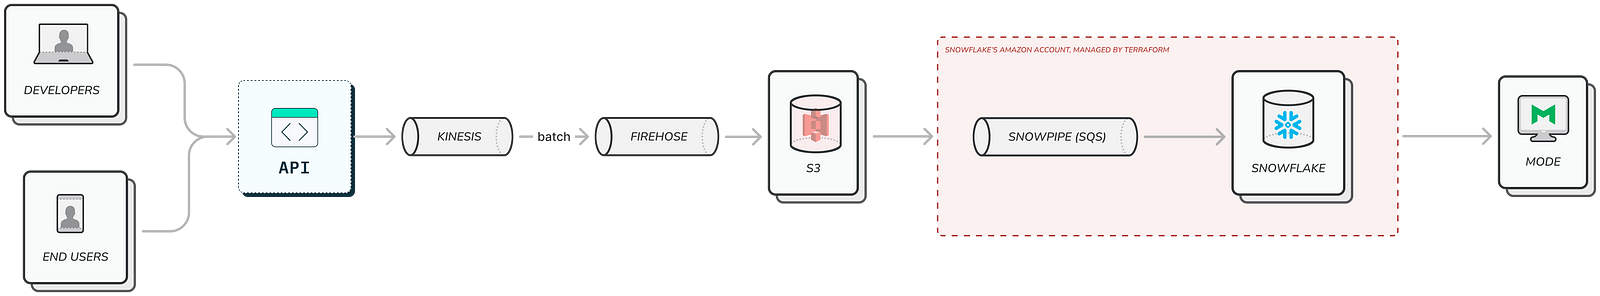 A diagram of Stytch's database management